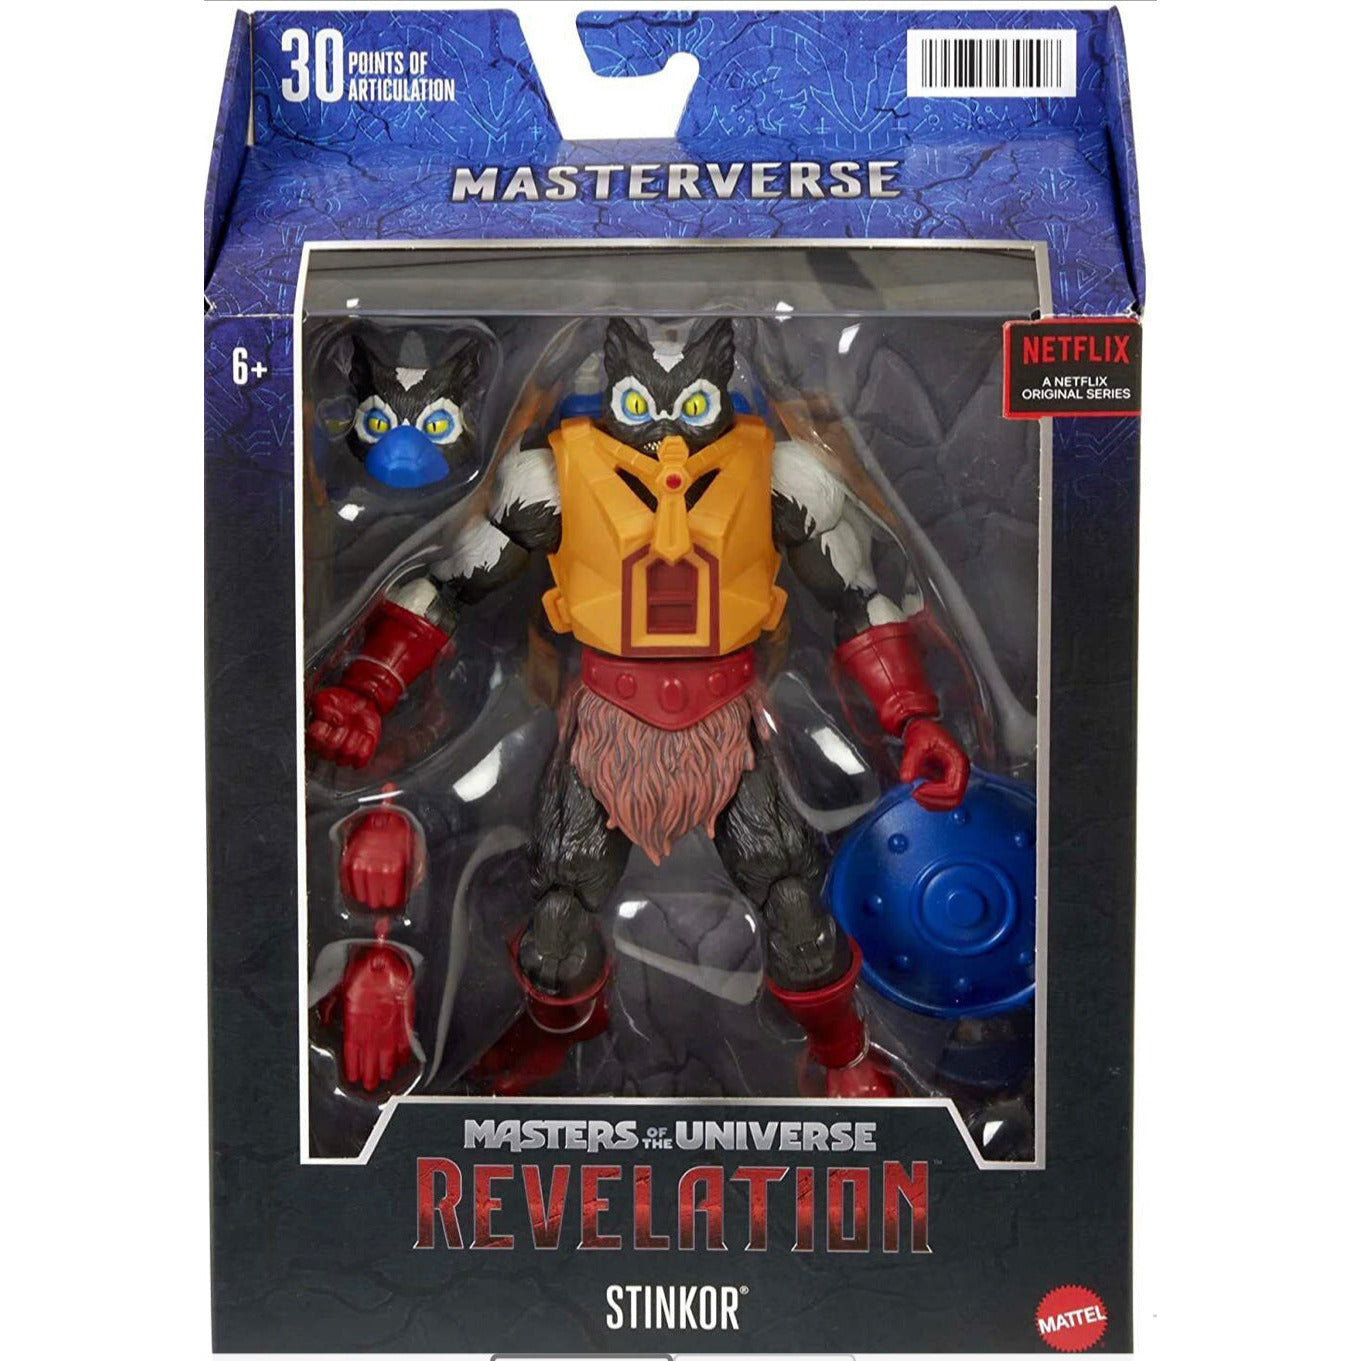 MASTERS OF THE UNIVERSE STINKOR REVELATION ACTION FIGURE IN STOCK - Plastic Empire